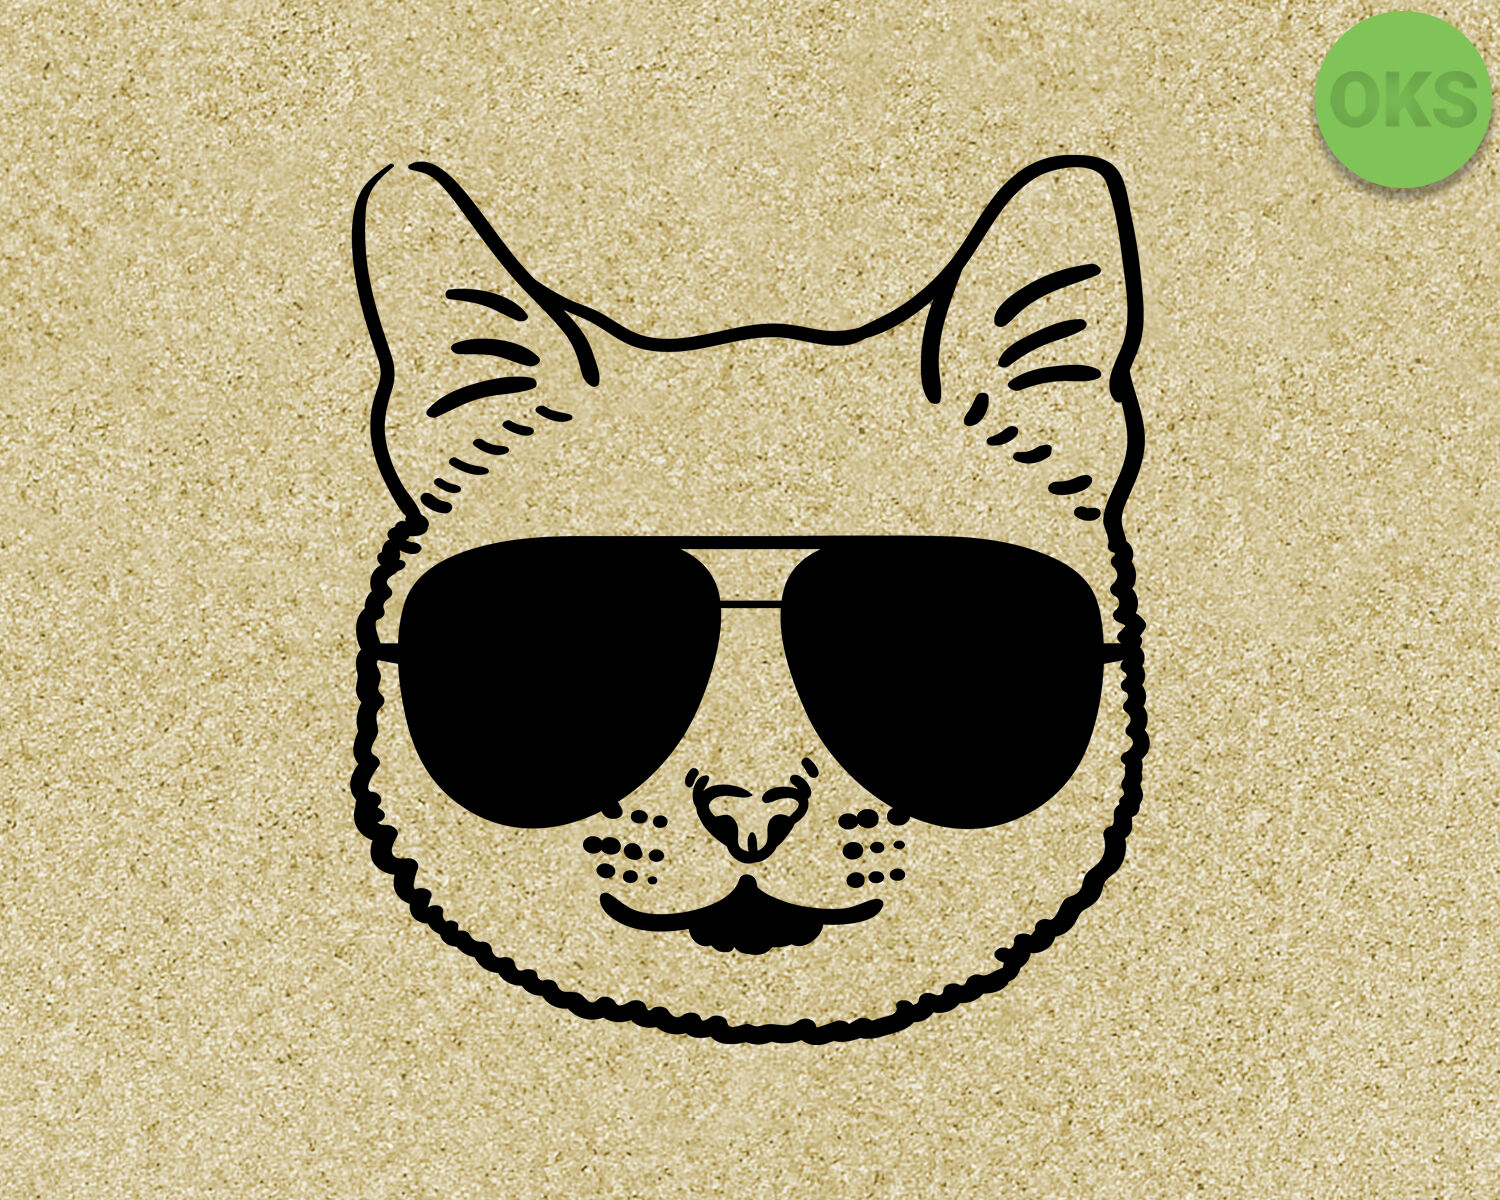 Cat With Sunglasses Svg Dxf Vector Eps Clipart Cricut Download By Crafteroks Thehungryjpeg Com